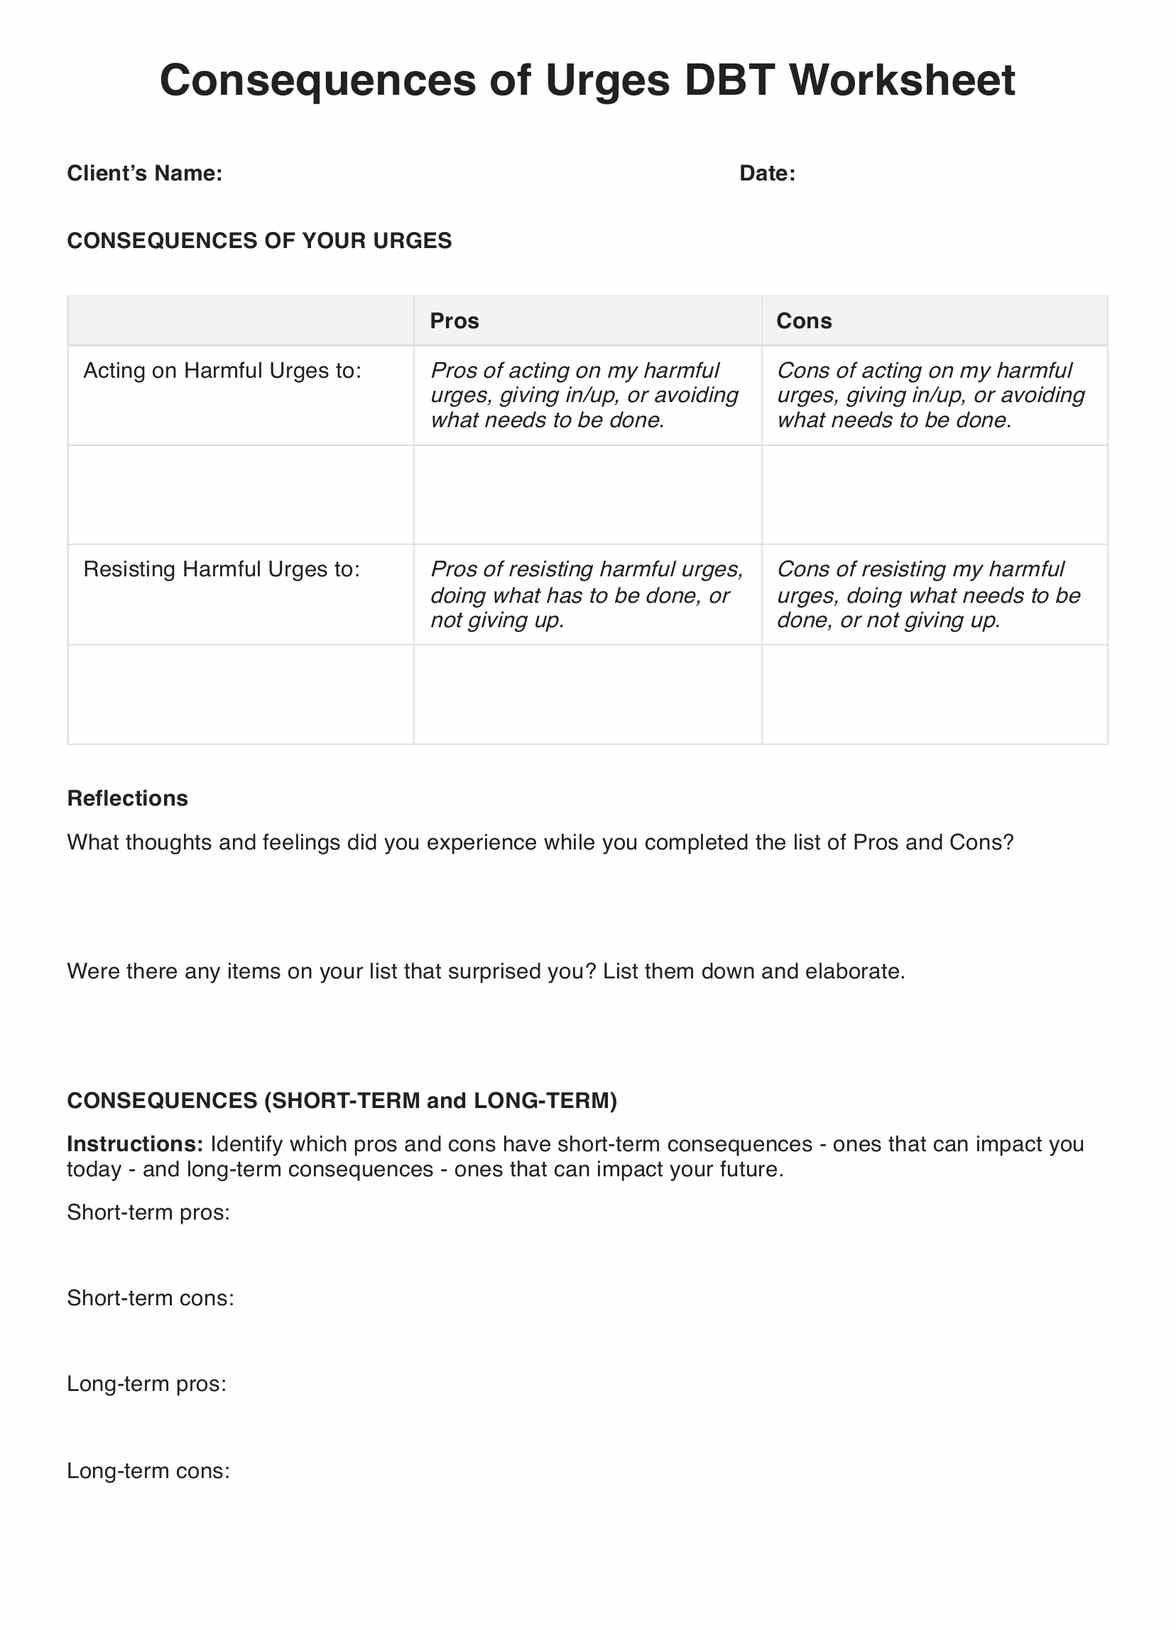 Consequences of Urges DBT Worksheet PDF Example